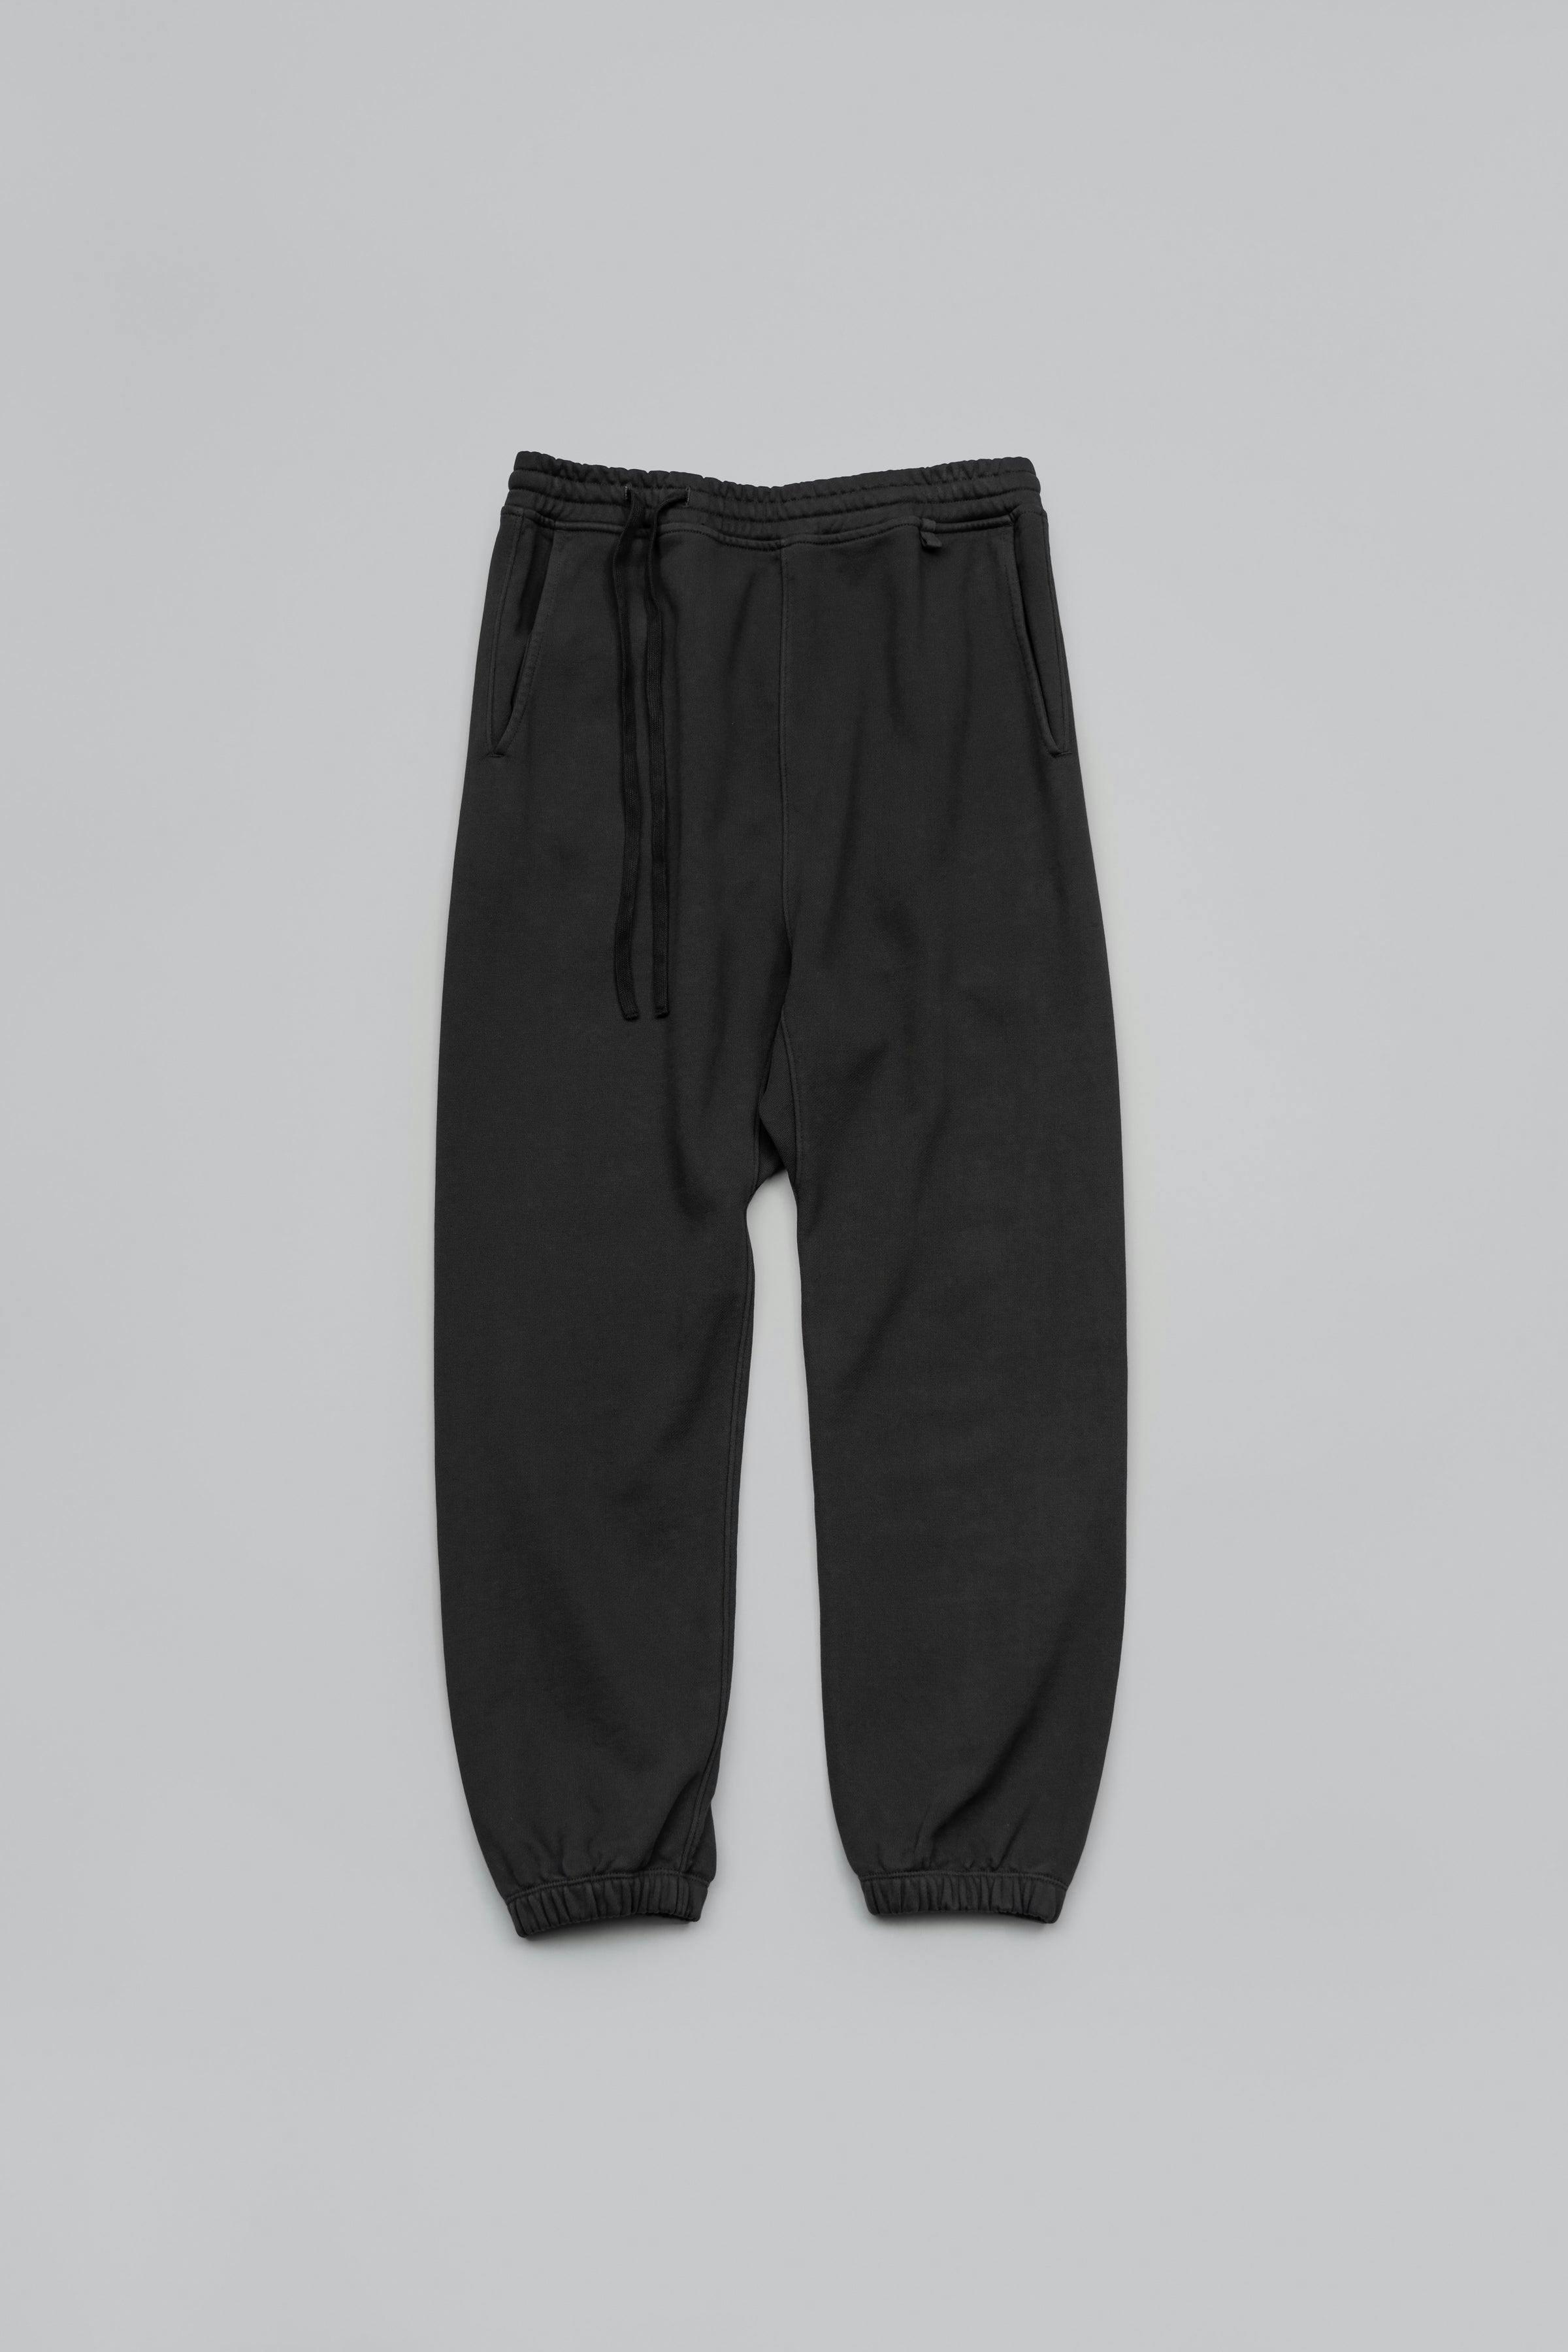 ˝CHAOS˝ Washed Sweatpants - Washed Charcoal